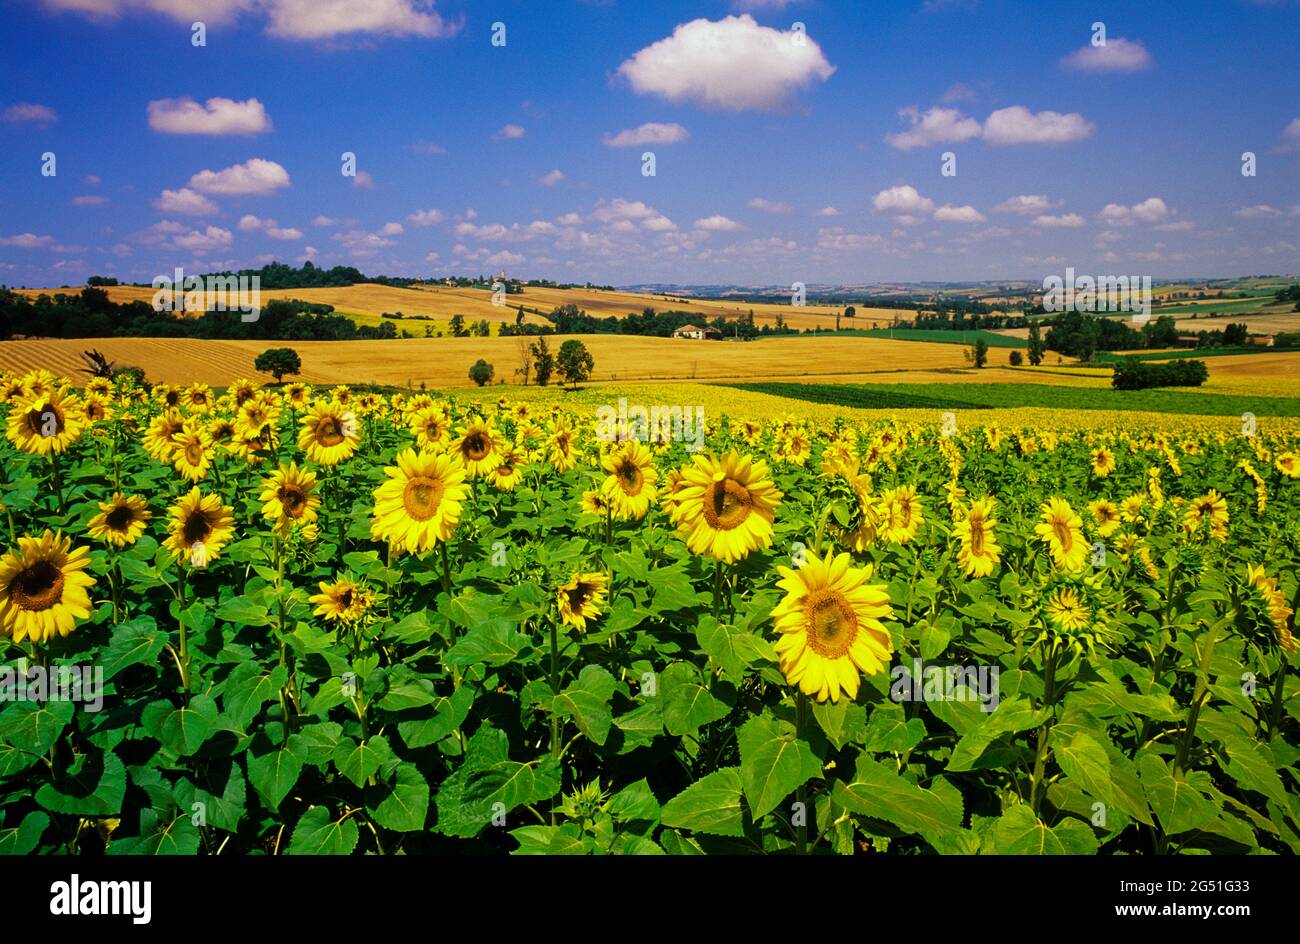 Landscape with sunflower field under blue sky, Lectoure, Occitanie, France Stock Photo